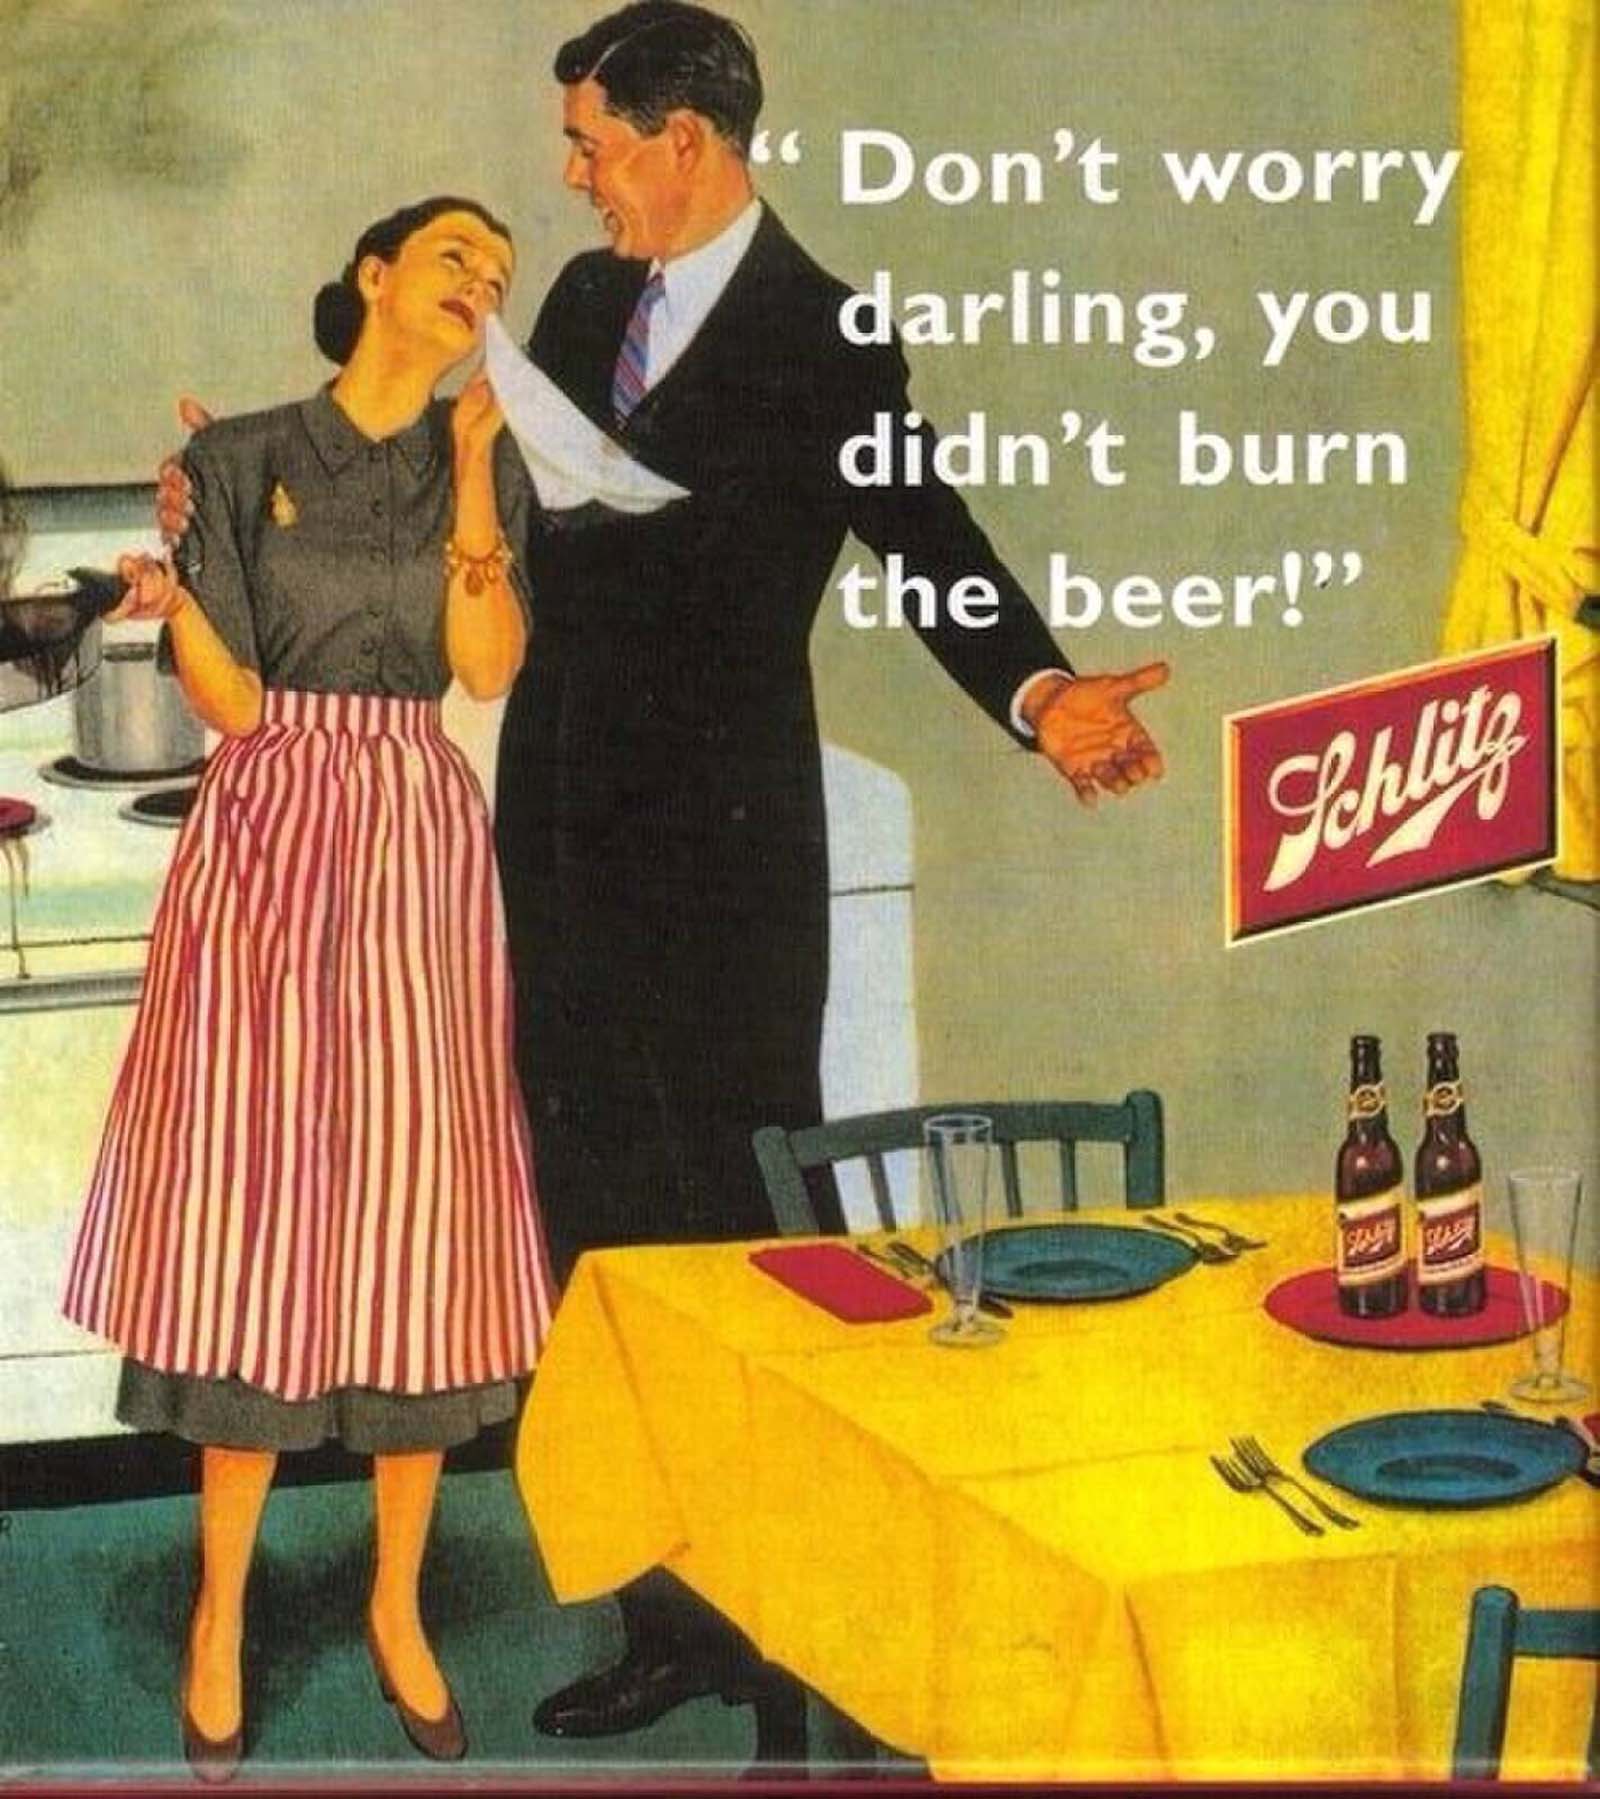 Don’t worry darling, you didn’t burn the beer!.